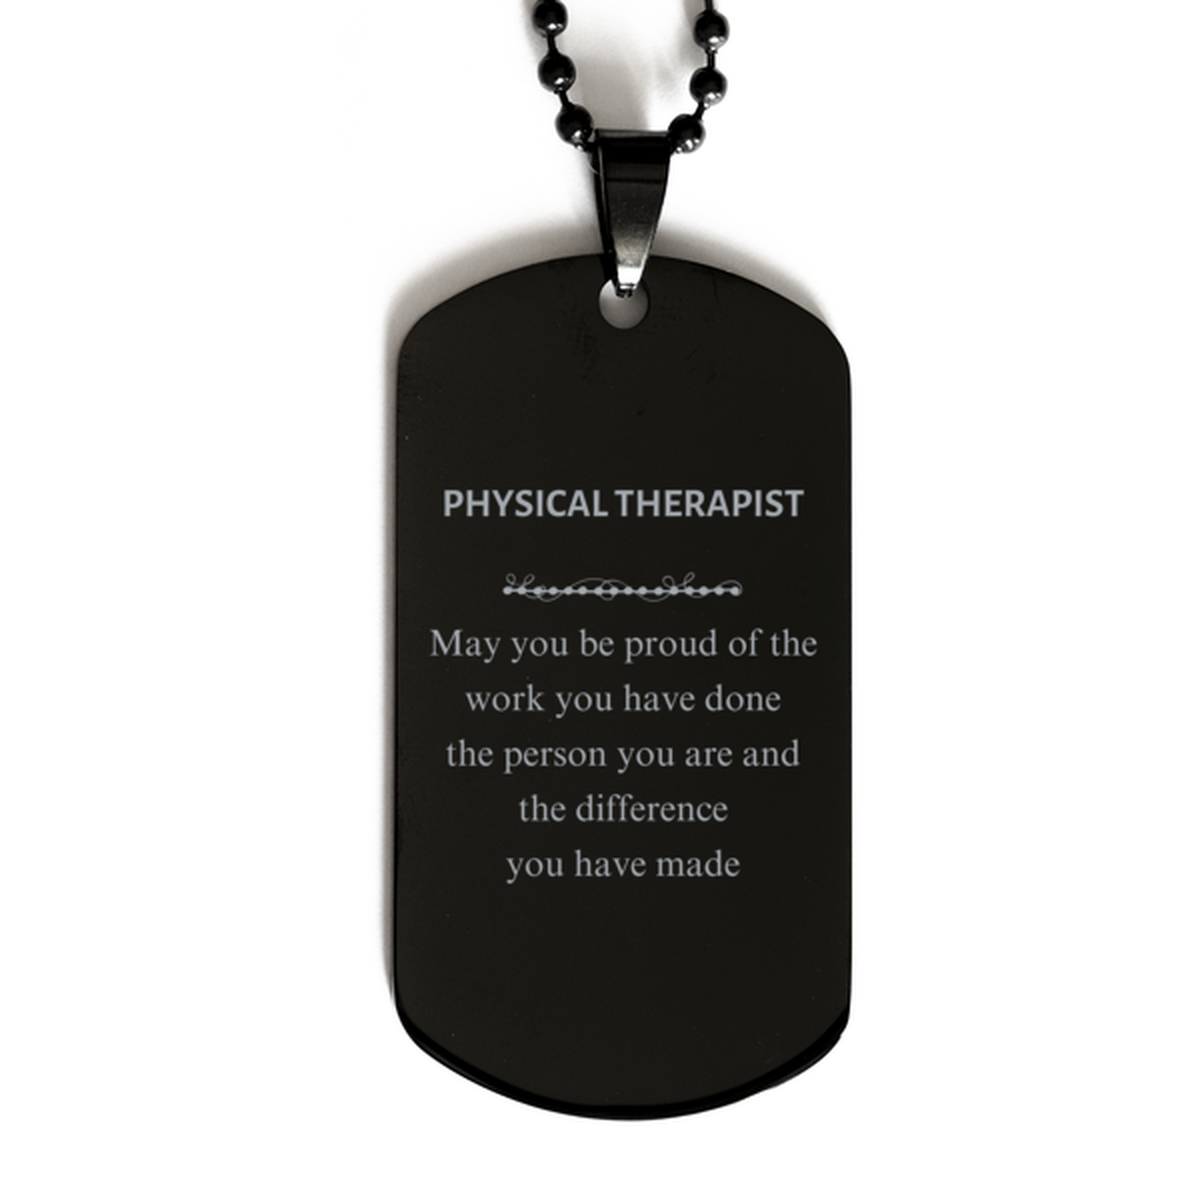 Physical Therapist May you be proud of the work you have done, Retirement Physical Therapist Black Dog Tag for Colleague Appreciation Gifts Amazing for Physical Therapist